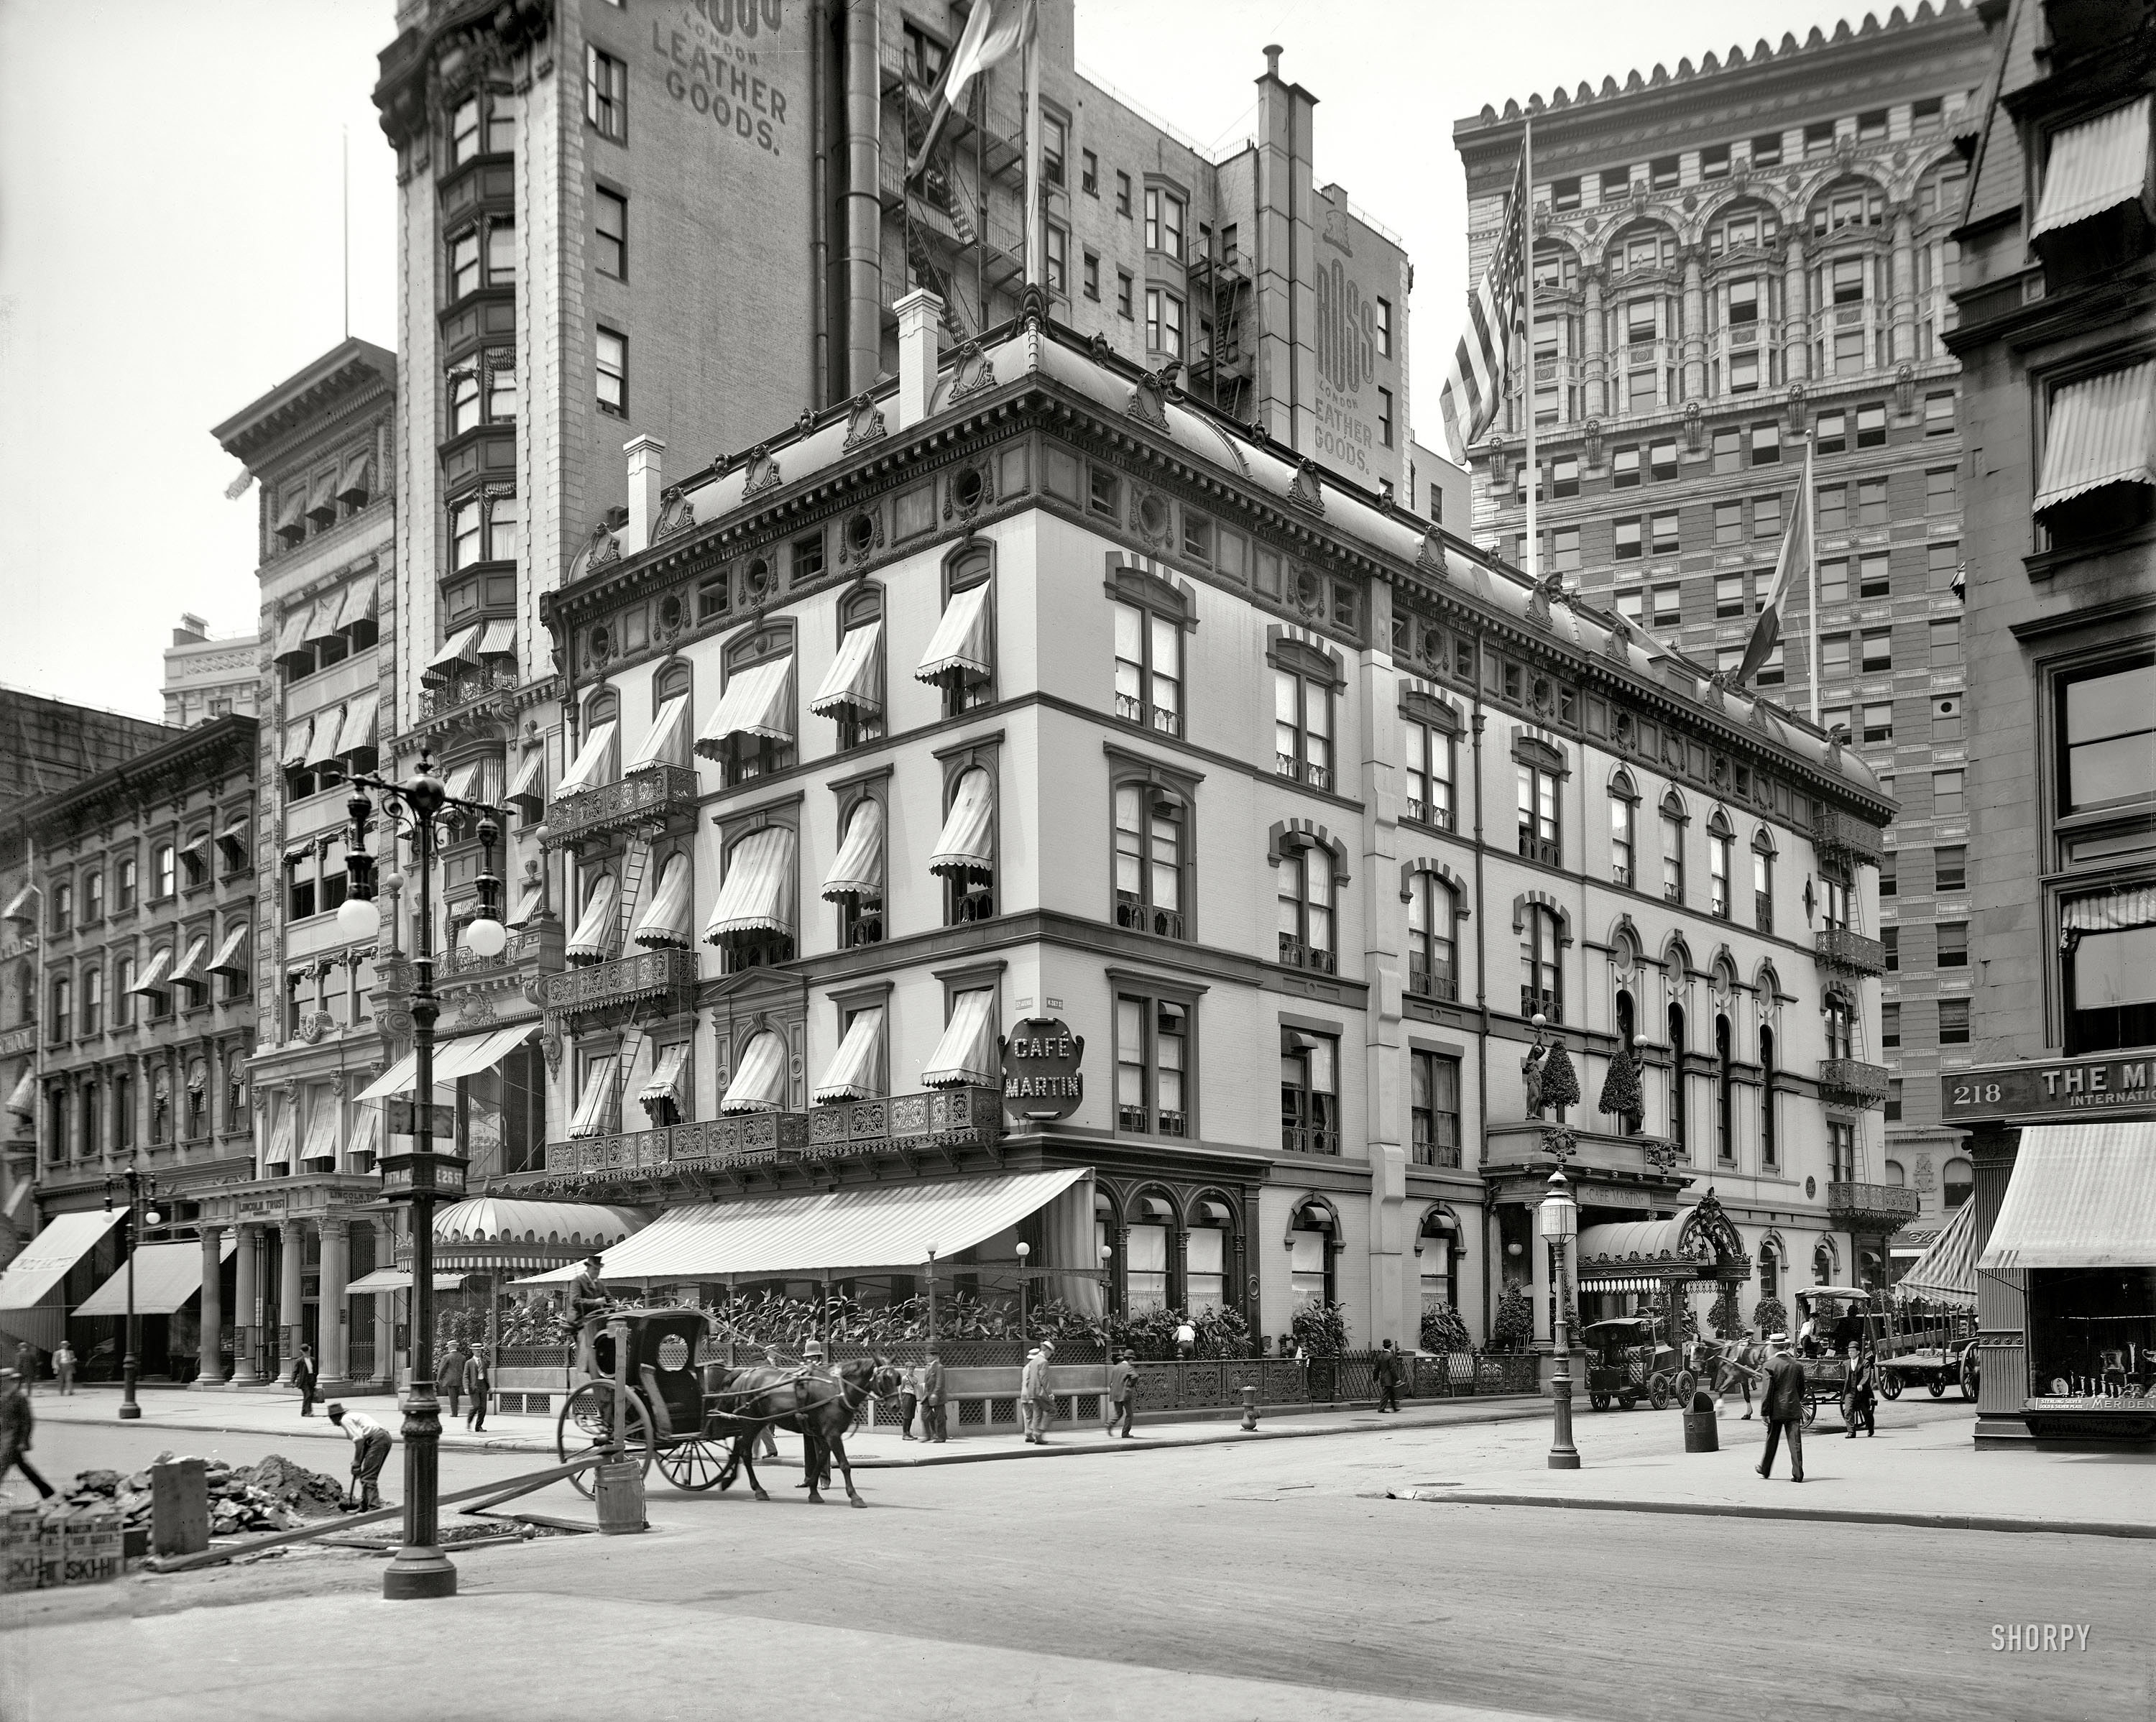 New York circa 1908. "Cafe Martin, Fifth Avenue and 26th Street."  8x10 inch dry plate glass negative, Detroit Publishing Company. View full size.